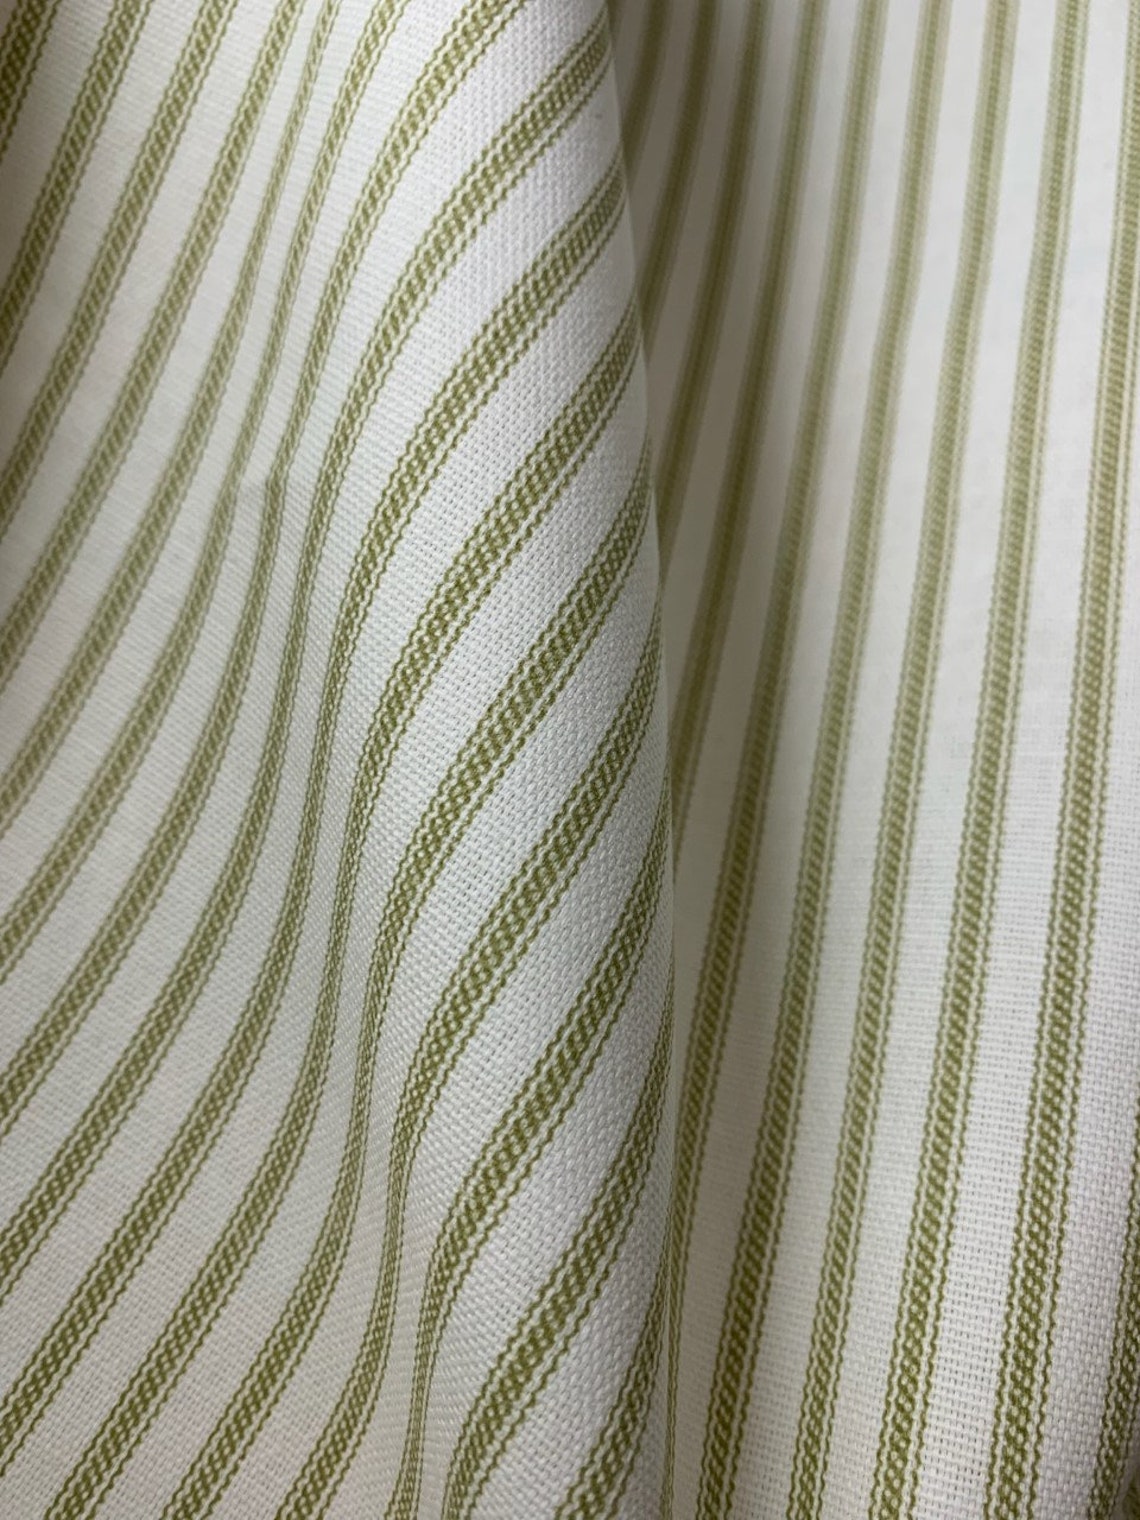 Made in the USA 54 Wide Olive Ticking Fabric by the Yard | Etsy